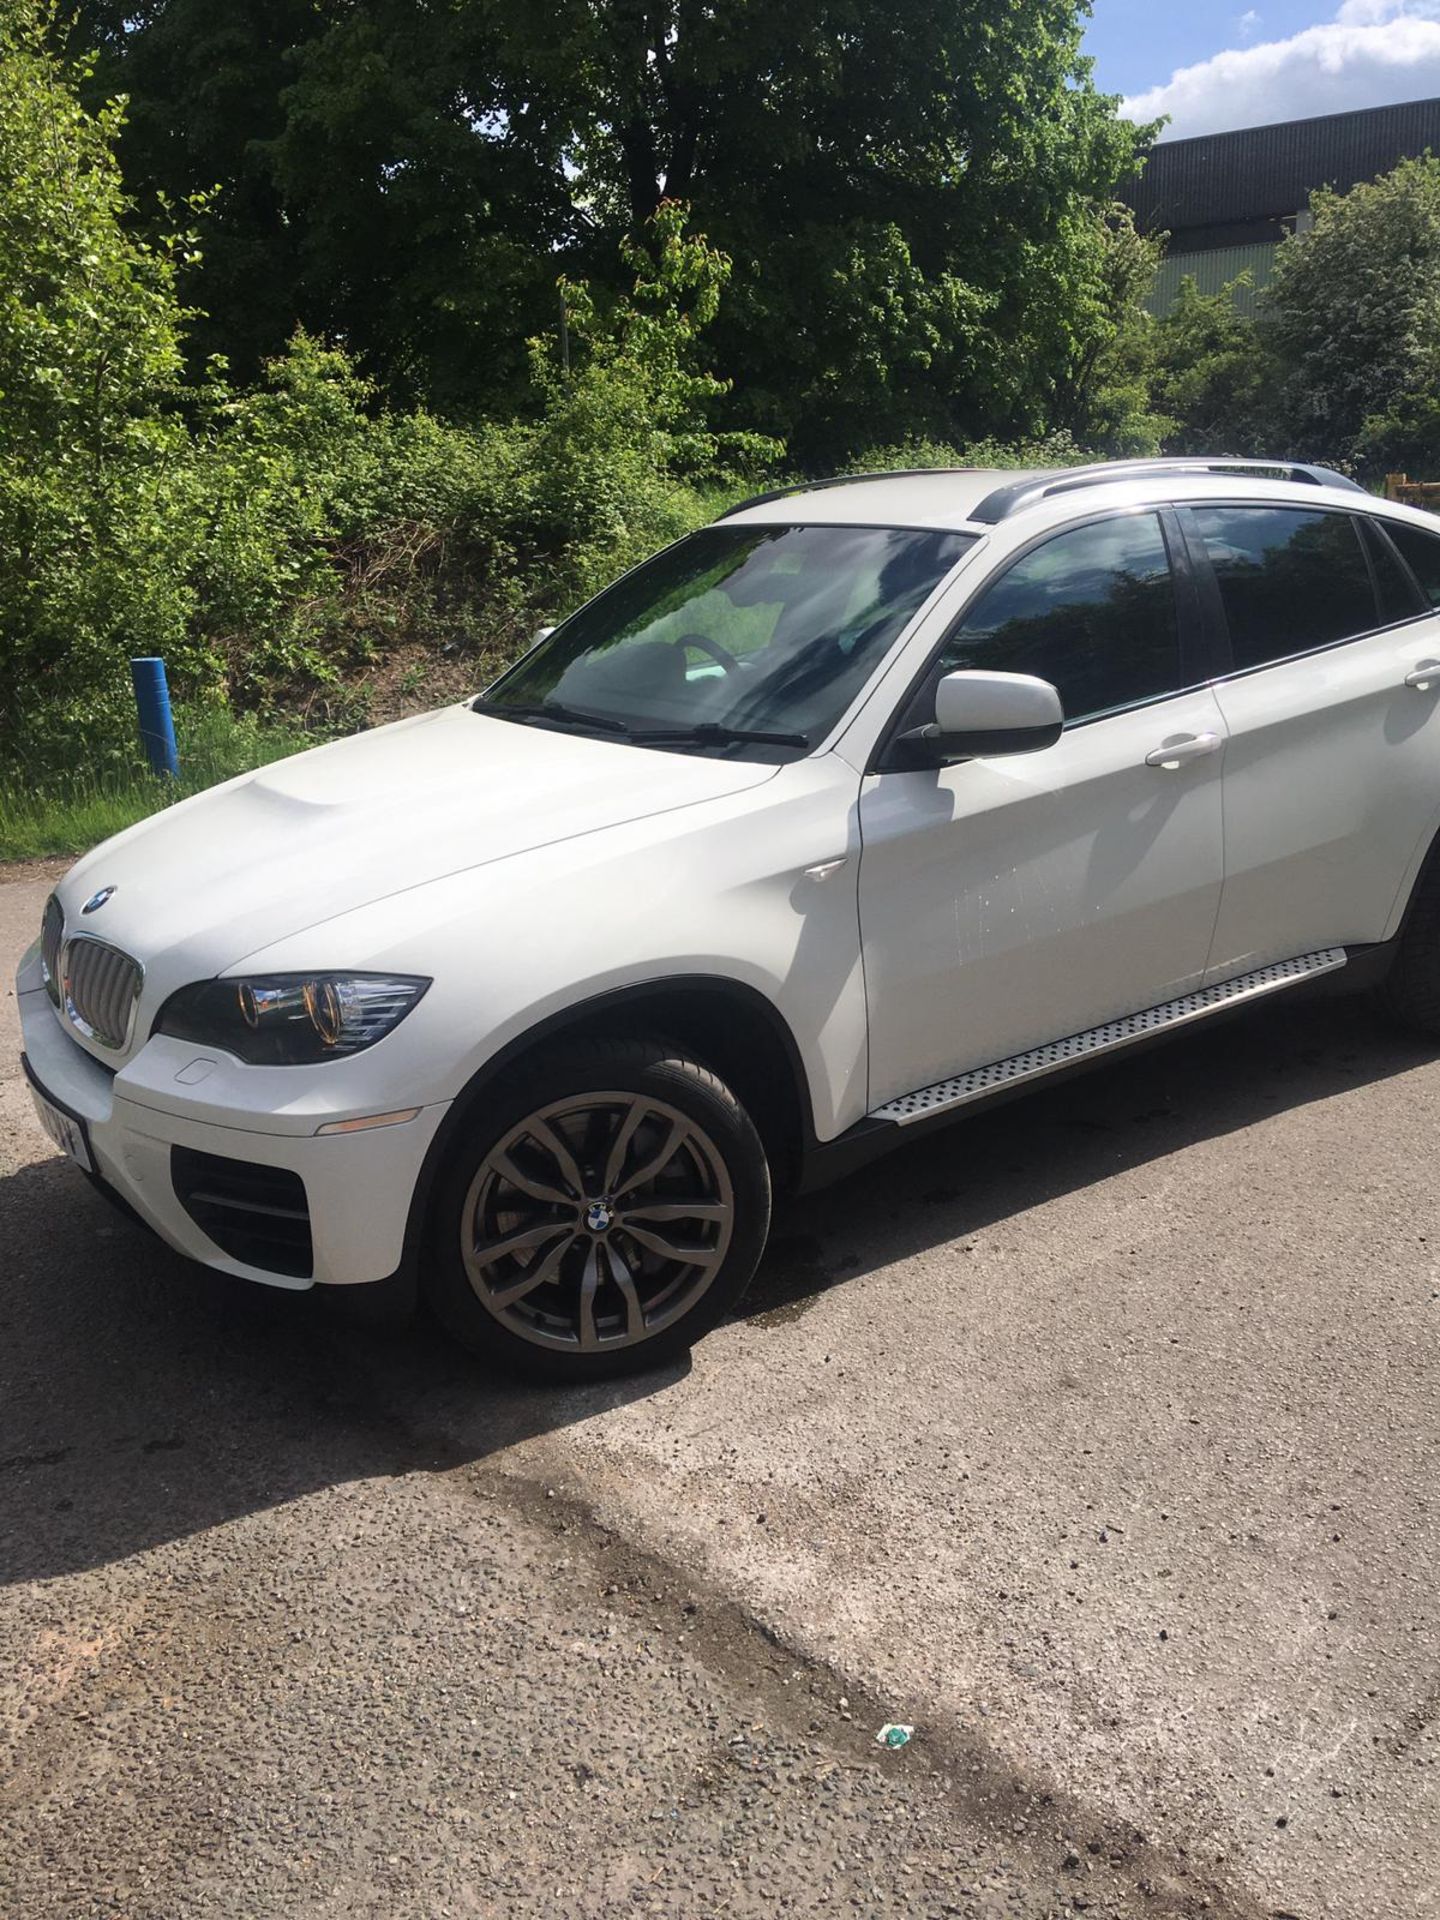 2013/13 REG BMW X6 M50D AUTOMATIC 3.0 DIESEL WHITE, SHOWING 1 FORMER KEEPER *NO VAT* - Image 3 of 36